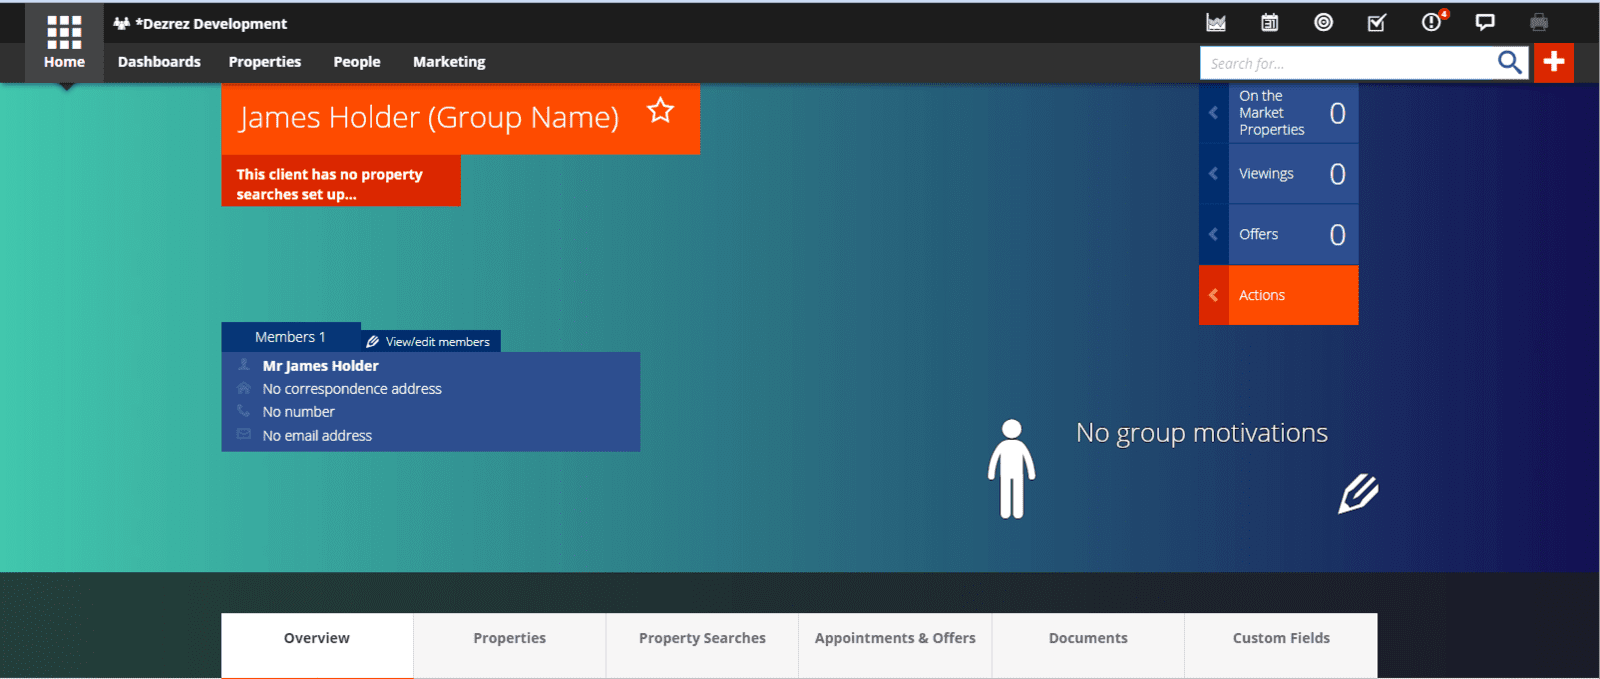 Group details screen from within Rezi.